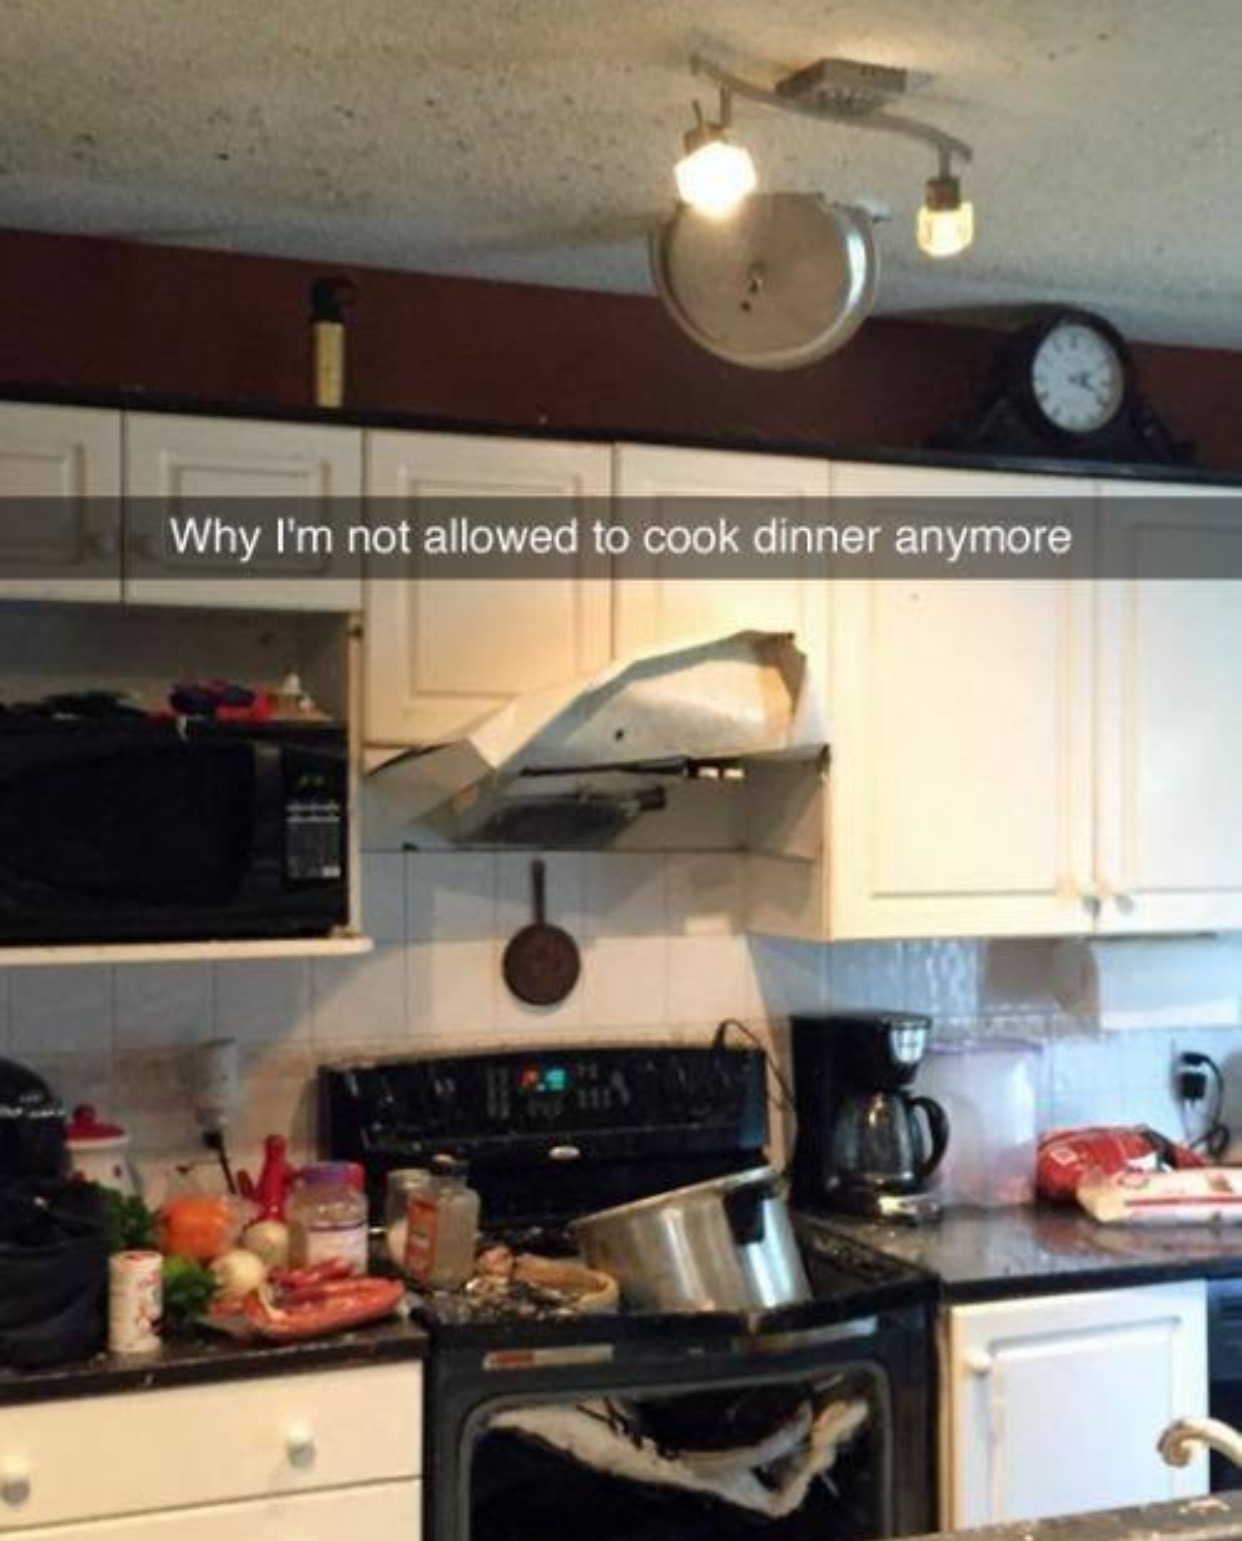 Why I’m not allowed to cook dinner anymore